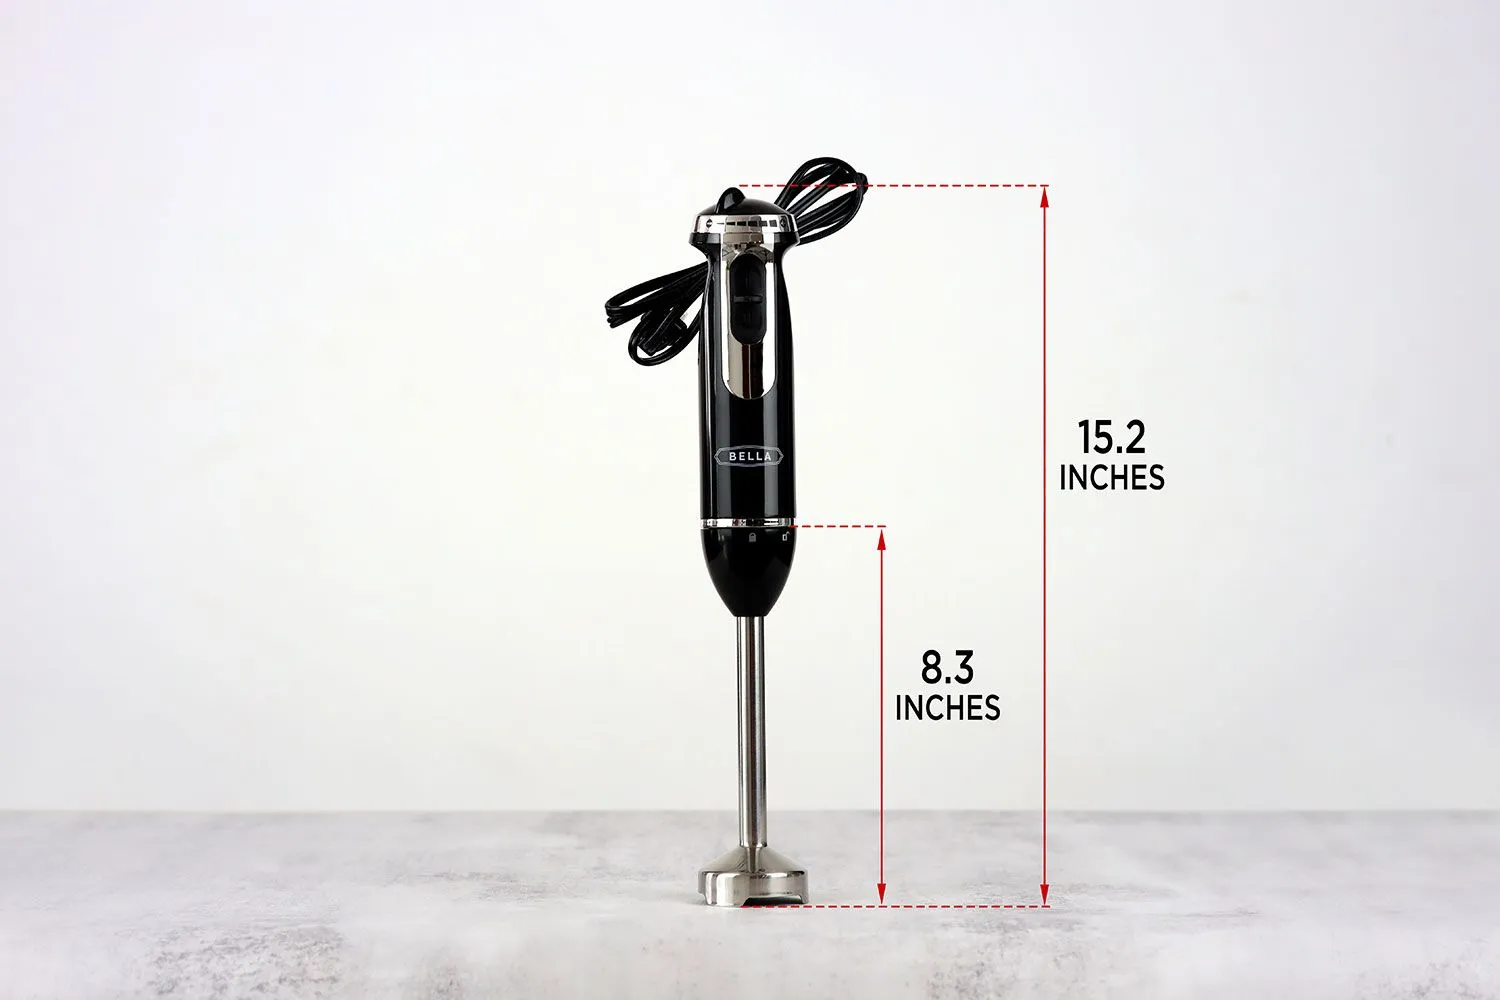 BELLA 10-Speed Immersion Blender with Attachments, 350 Watt, Immersion  Blender with Dishwasher Safe Whisk & Blending Attachments for Food Prep,  Black